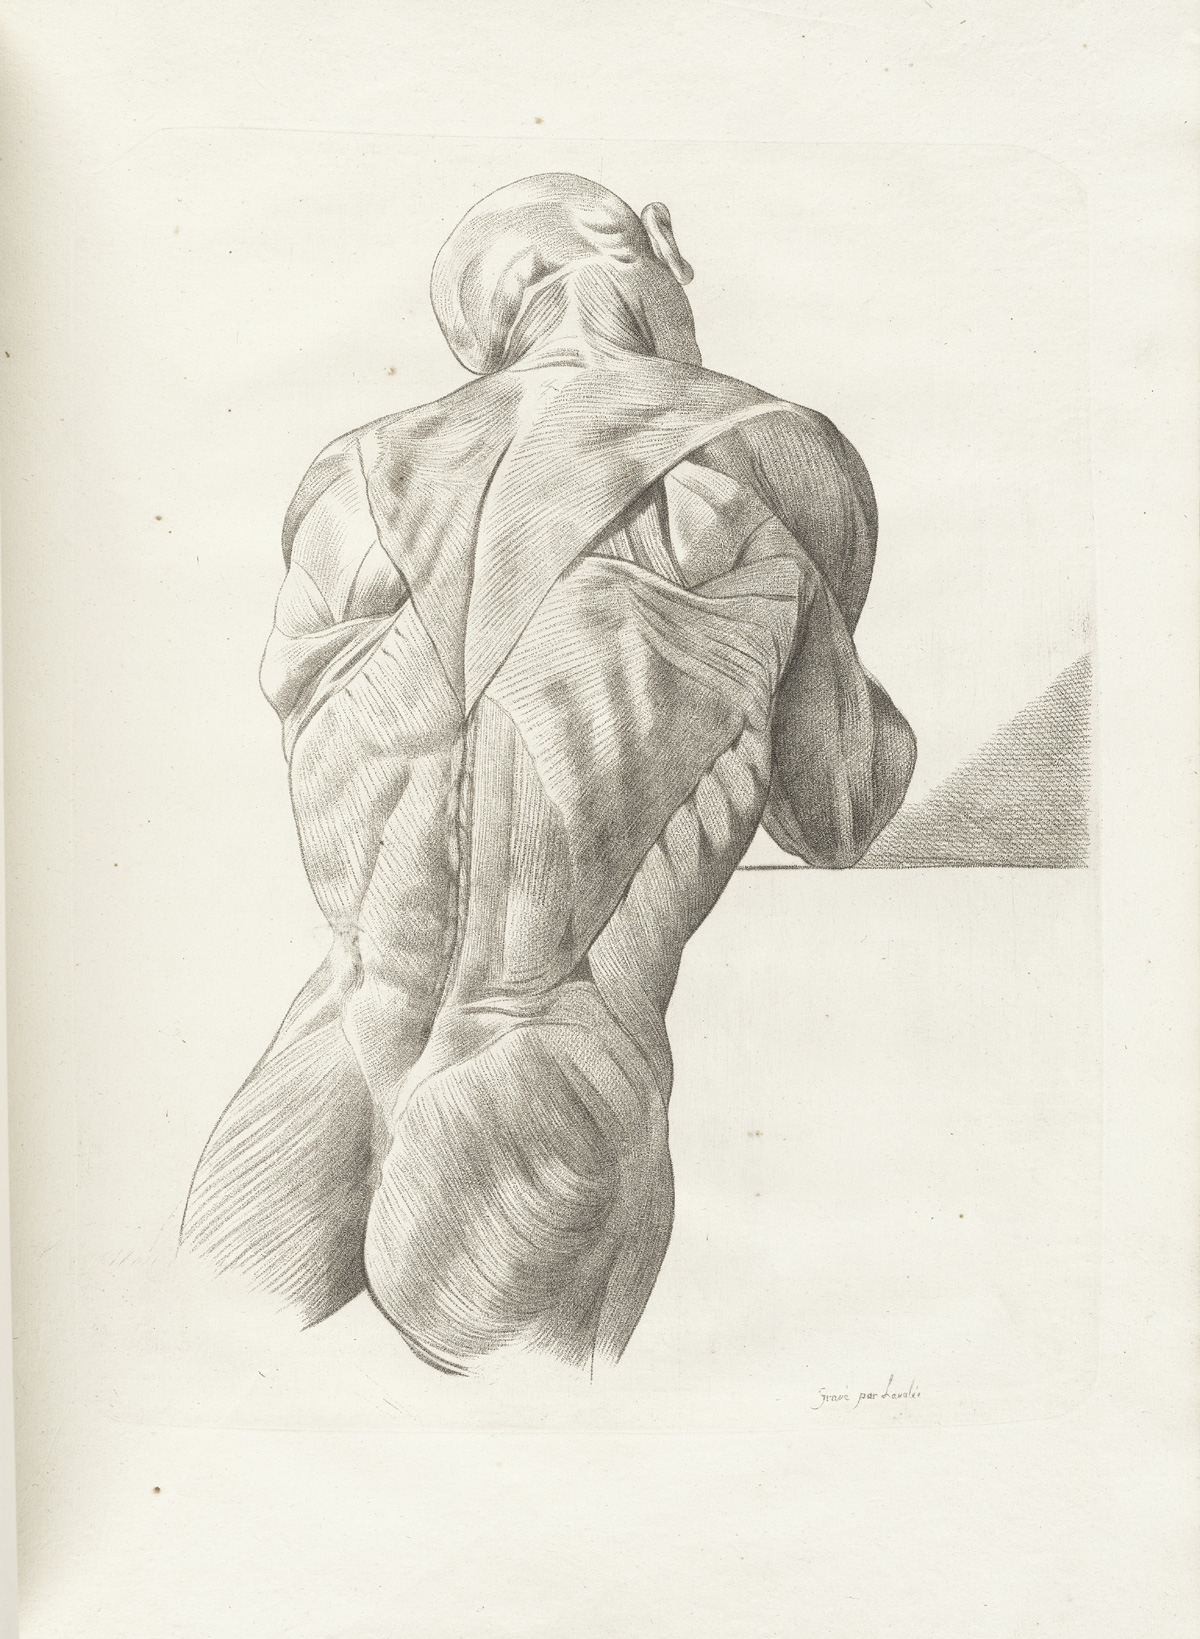 Engraving of a male muscle figure with his back to the viewer with flesh removed to expose the muscles of the back and buttocks; from Jacques Gamelin’s Nouveau recueil d’osteologie et de myologie, NLM Call no.: WZ 260 G178m 1779.